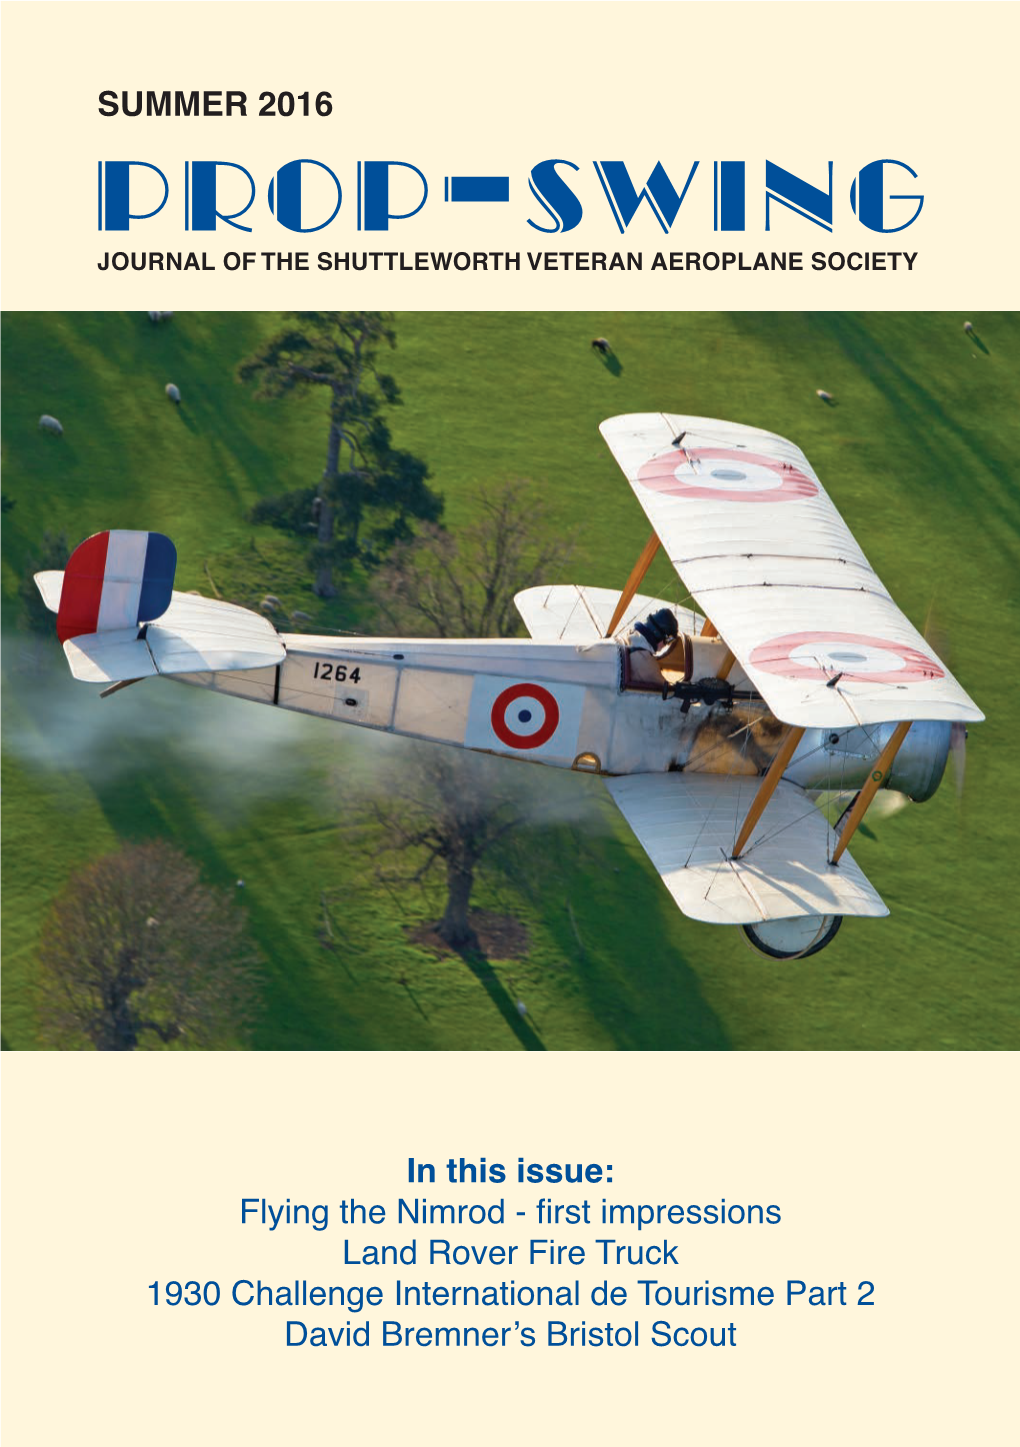 SUMMER 2016 in This Issue: Flying the Nimrod